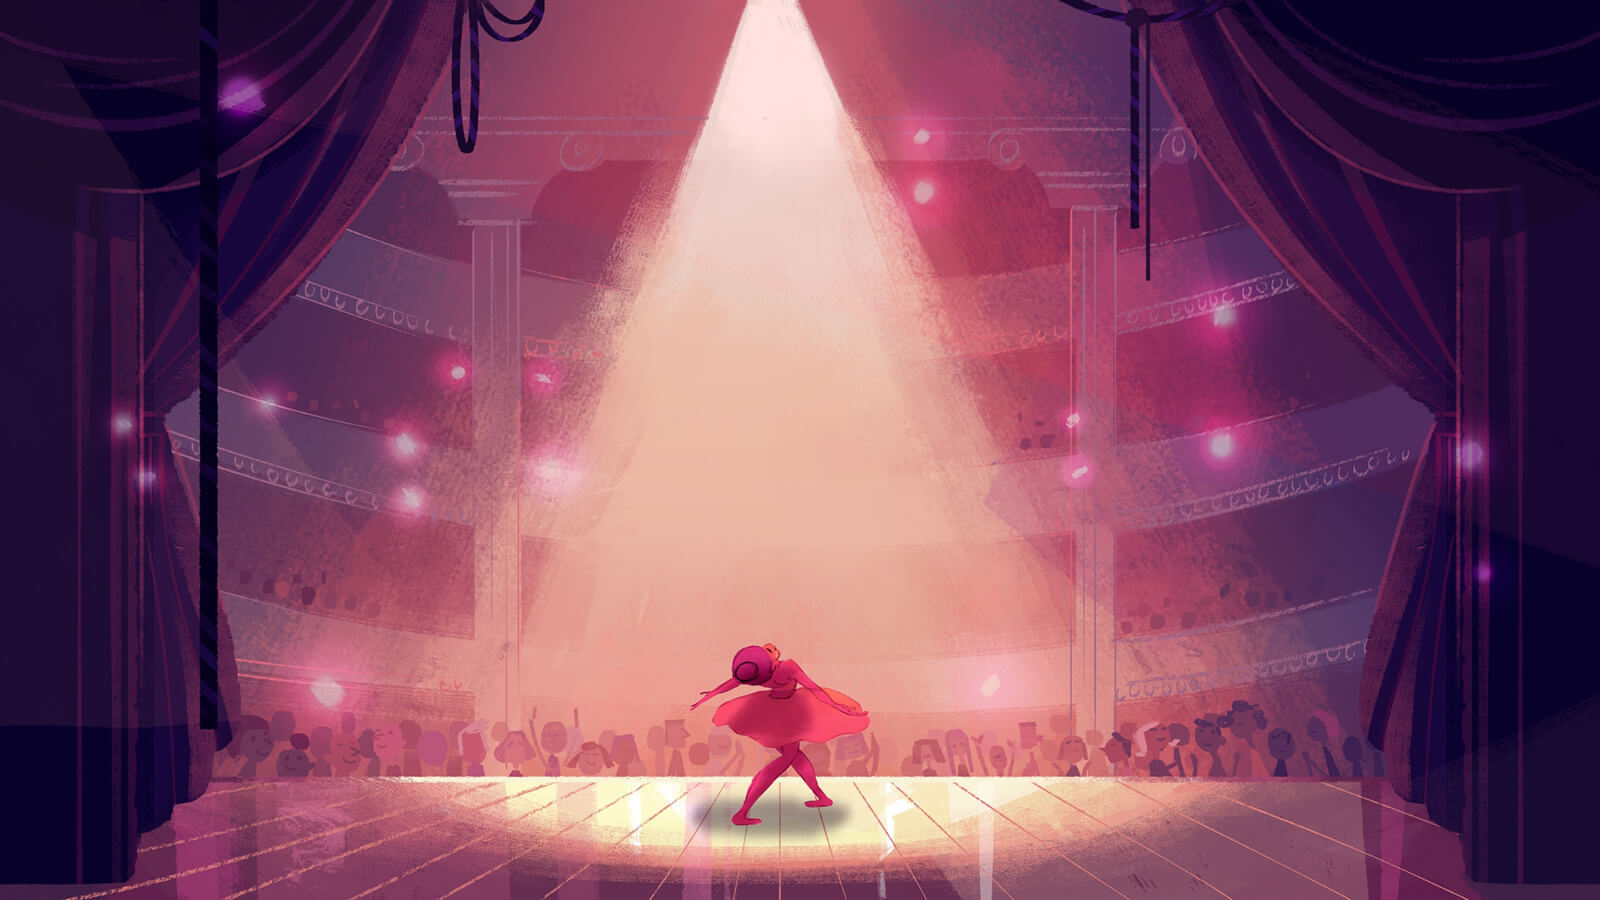 A ballerina, bathed in pink stage light, dances in front of a packed audience in a large, ornate theater.